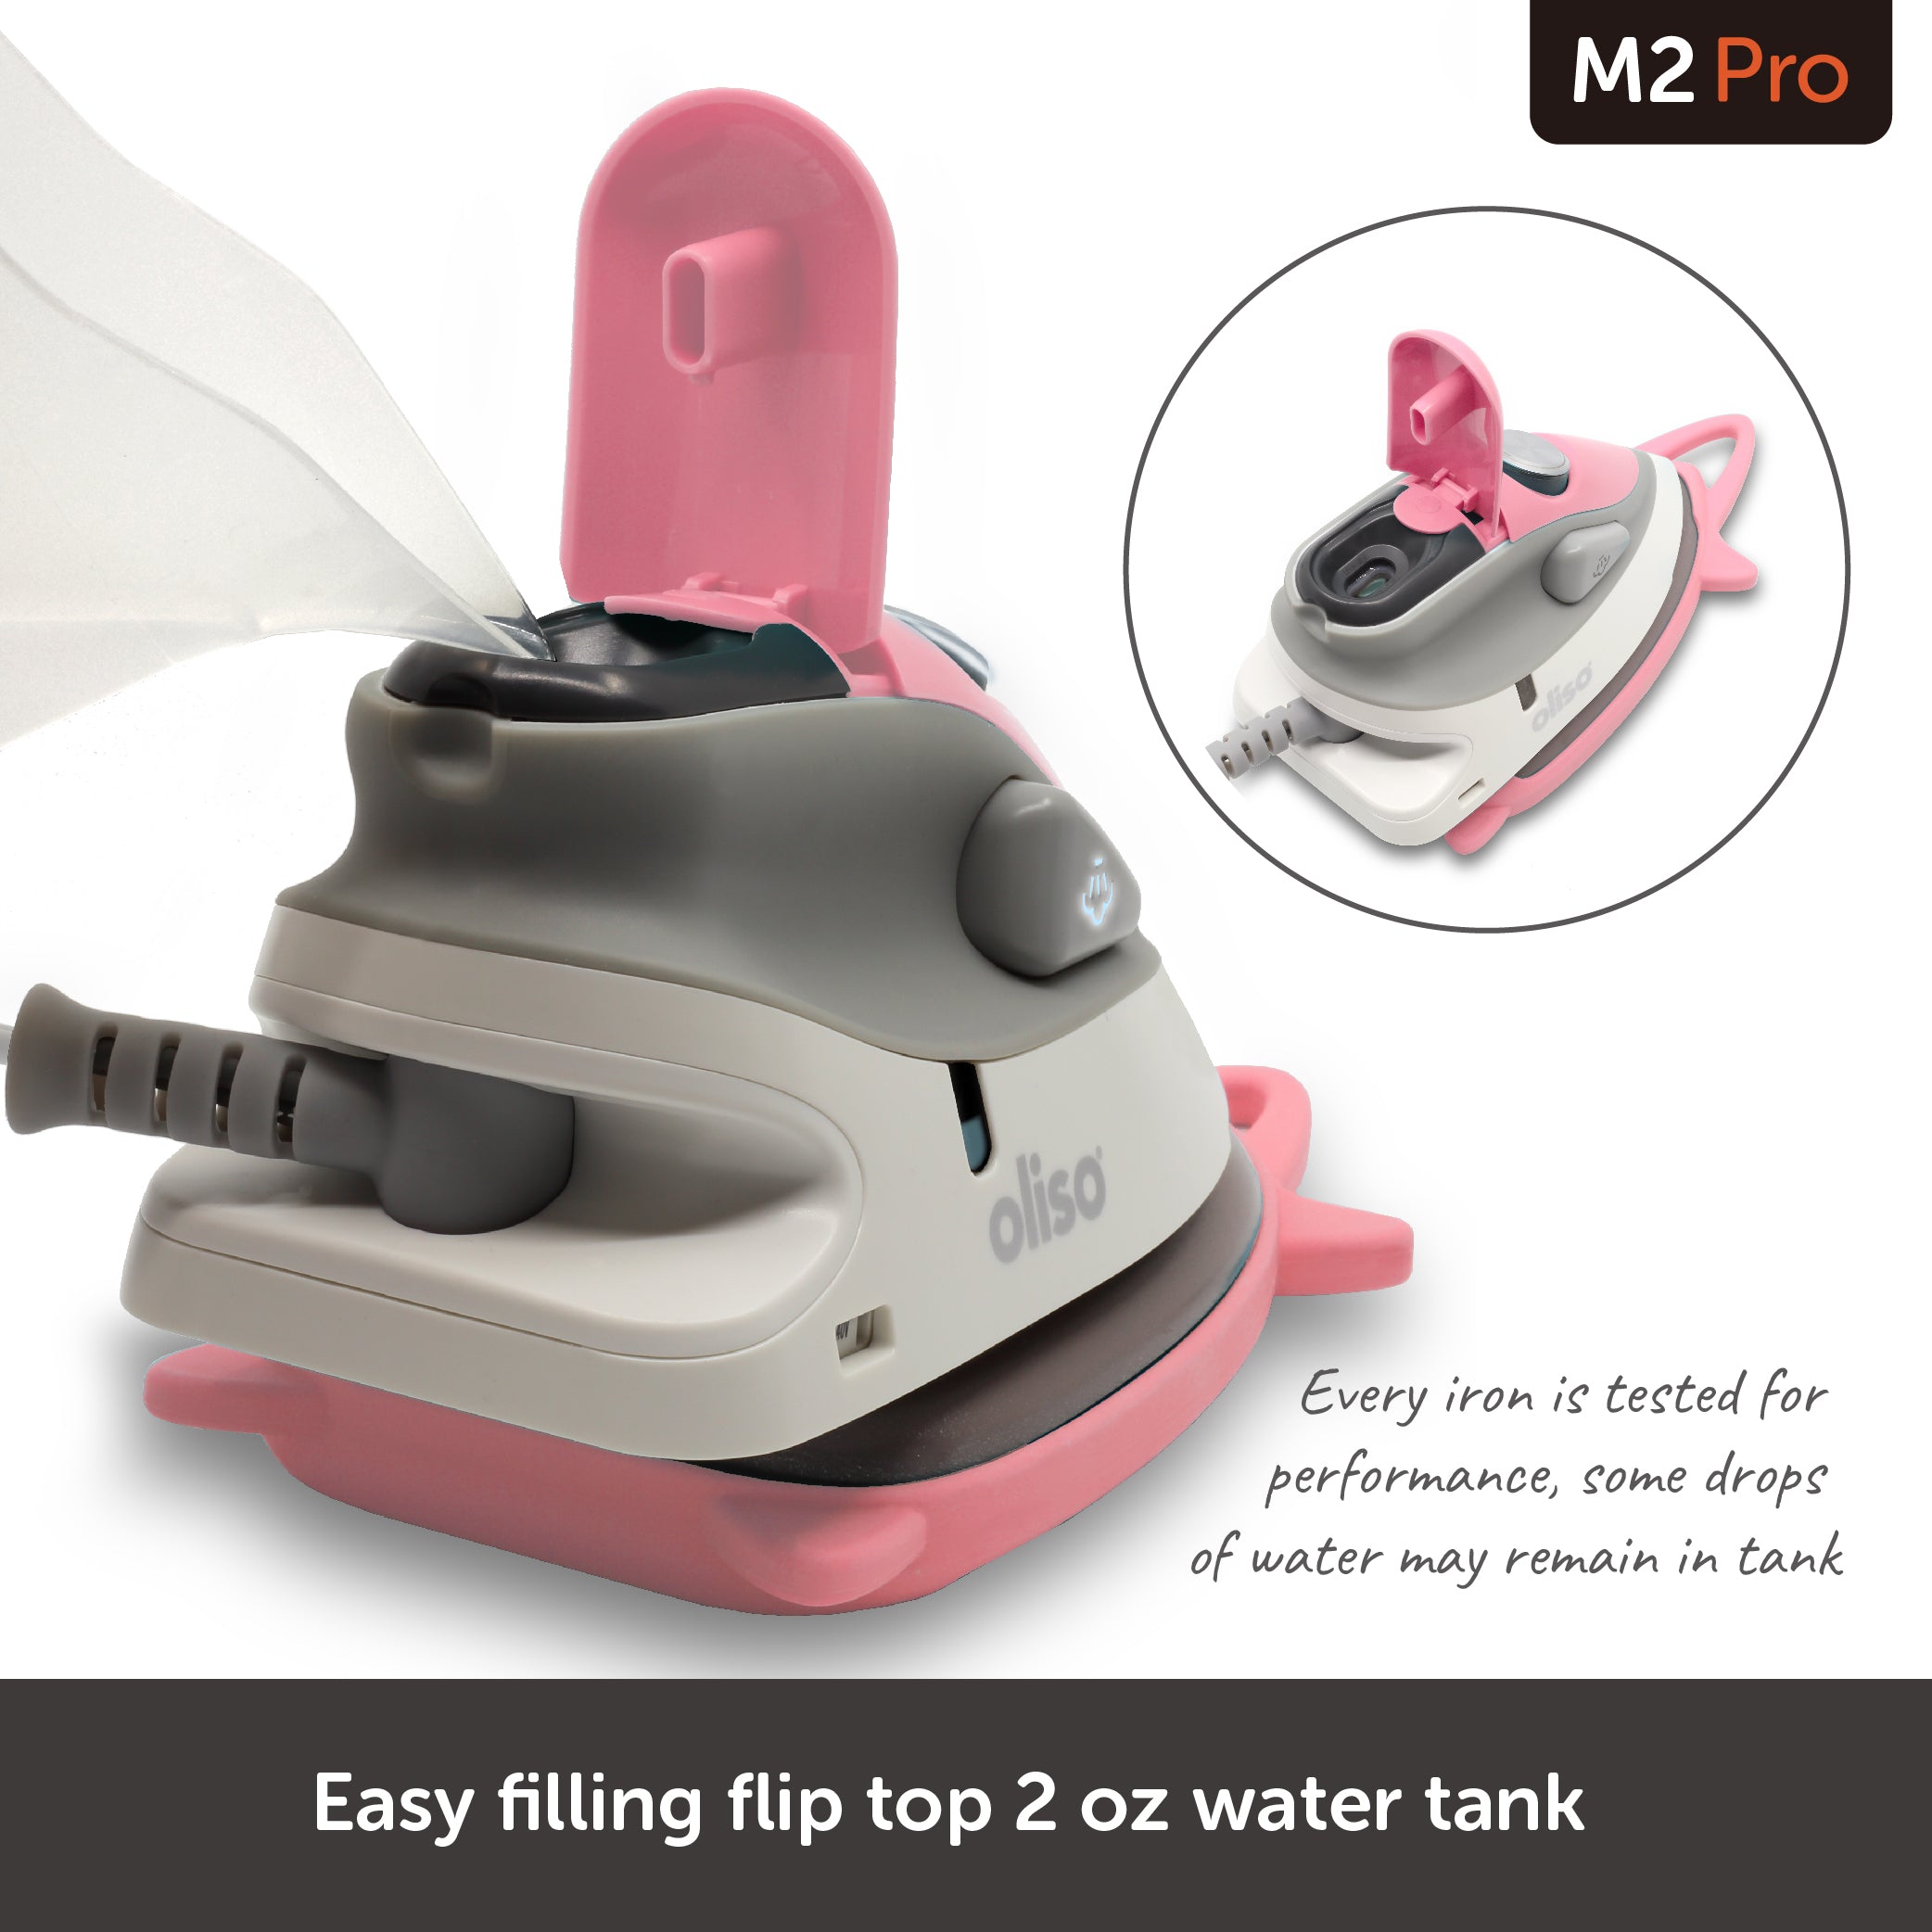 Oliso Mini Project Iron Review – Pieceful Thoughts